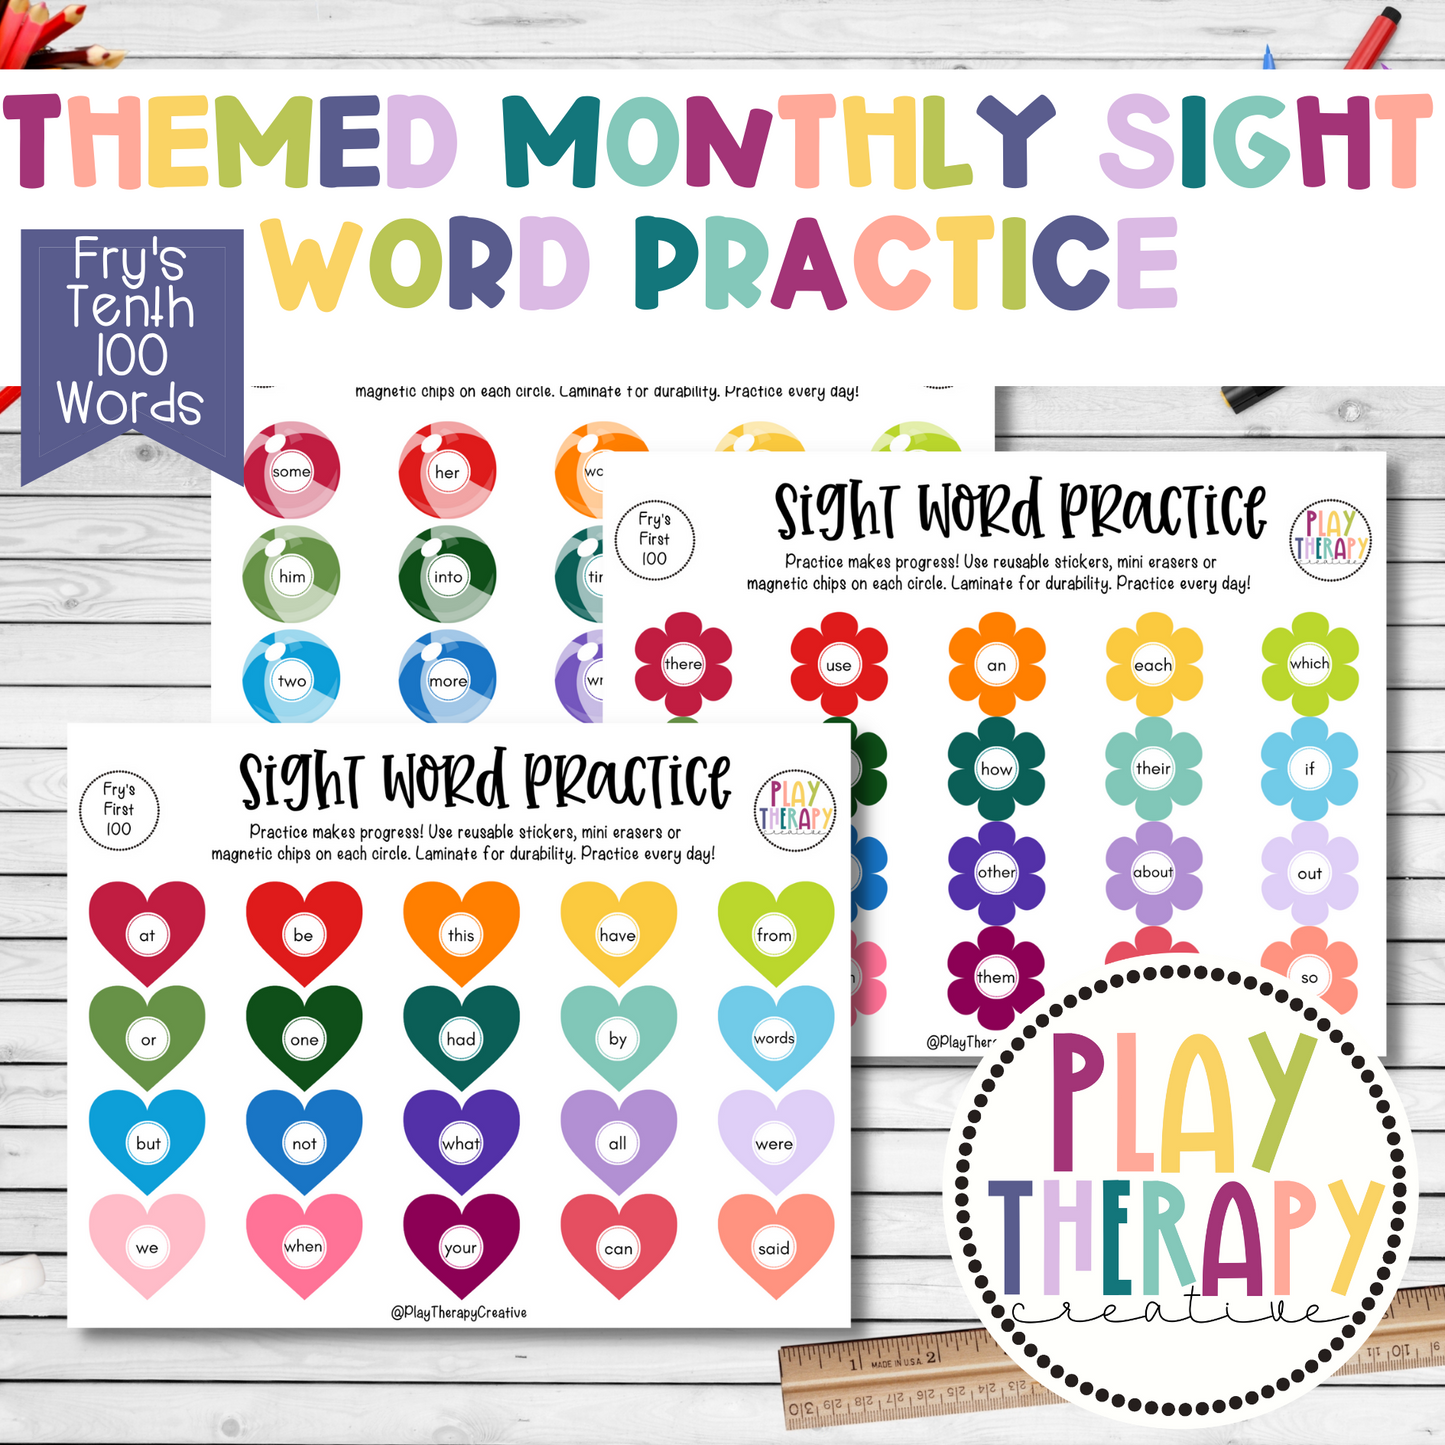 Themed Monthly Sight Word Practice / Fry’s Tenth 100 Sight Words